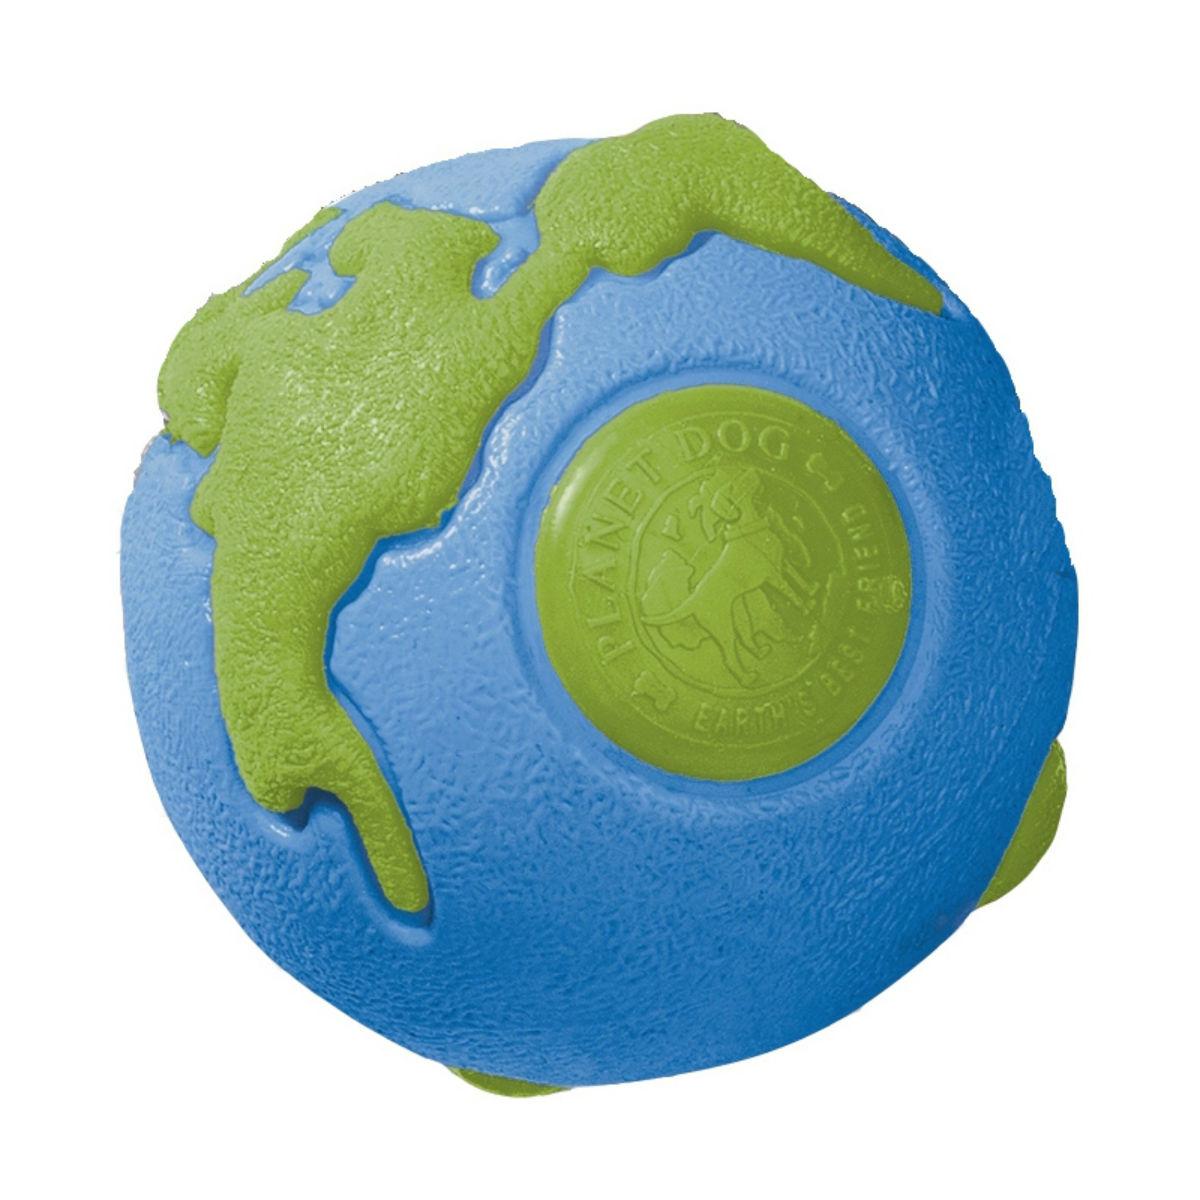 Planet Dog Orbee-Tuff Orbee Ball Dog Toy - Blue and Green